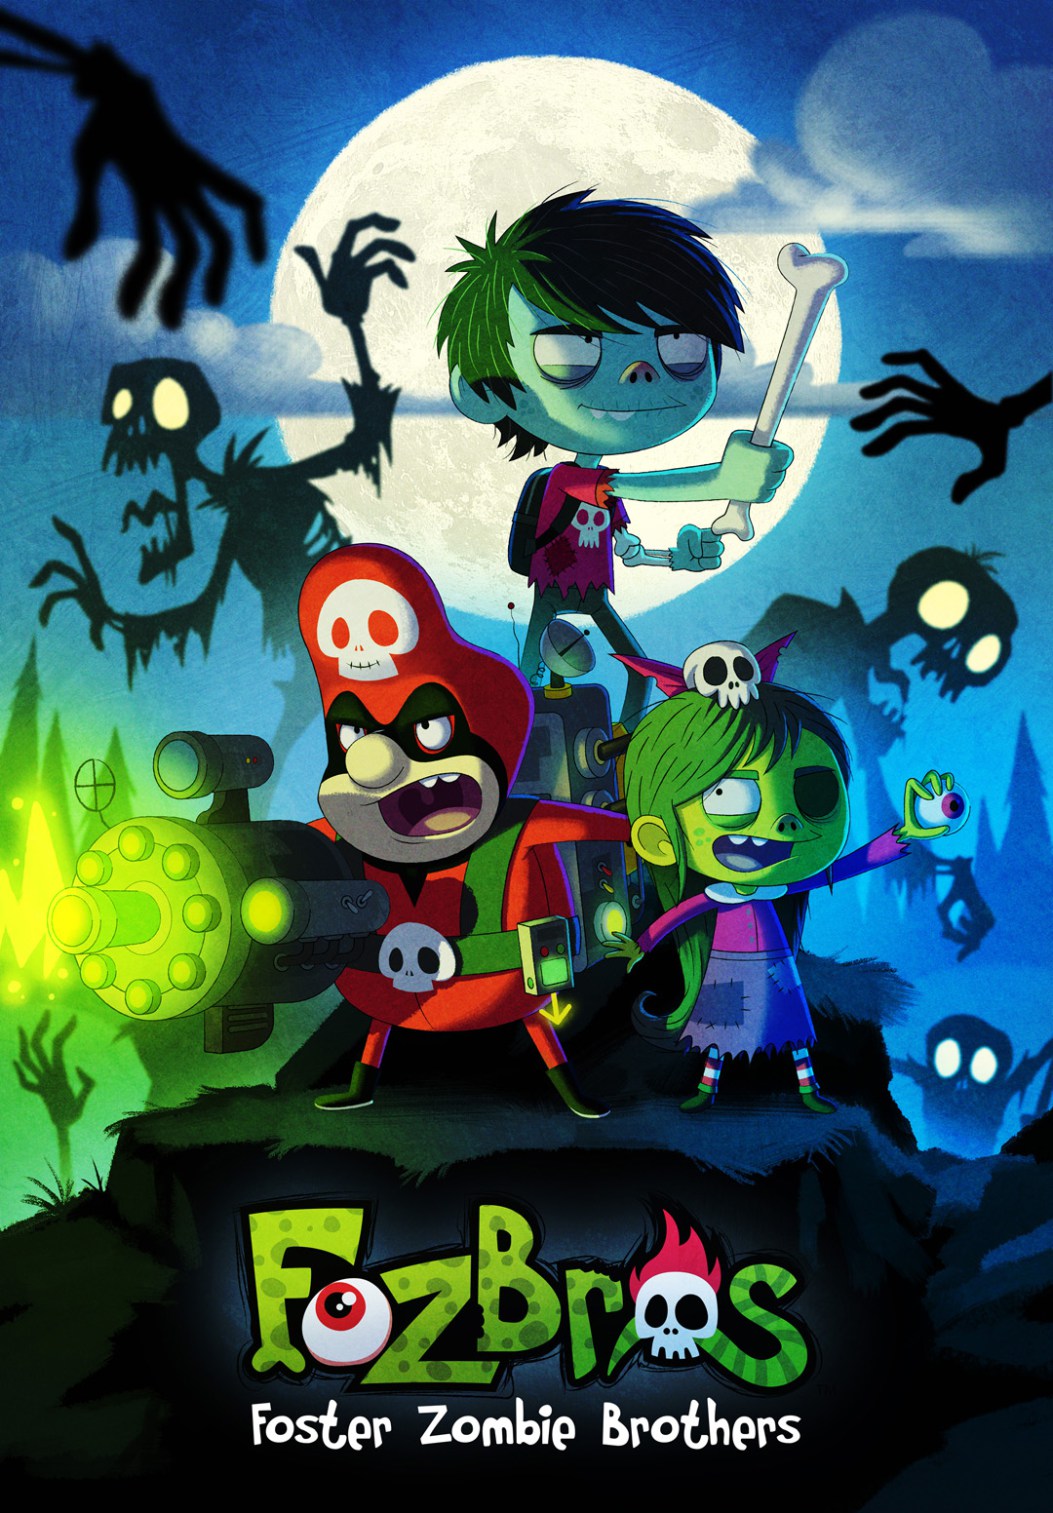 2D Foster Zombie Brothers Cartoon Illustration